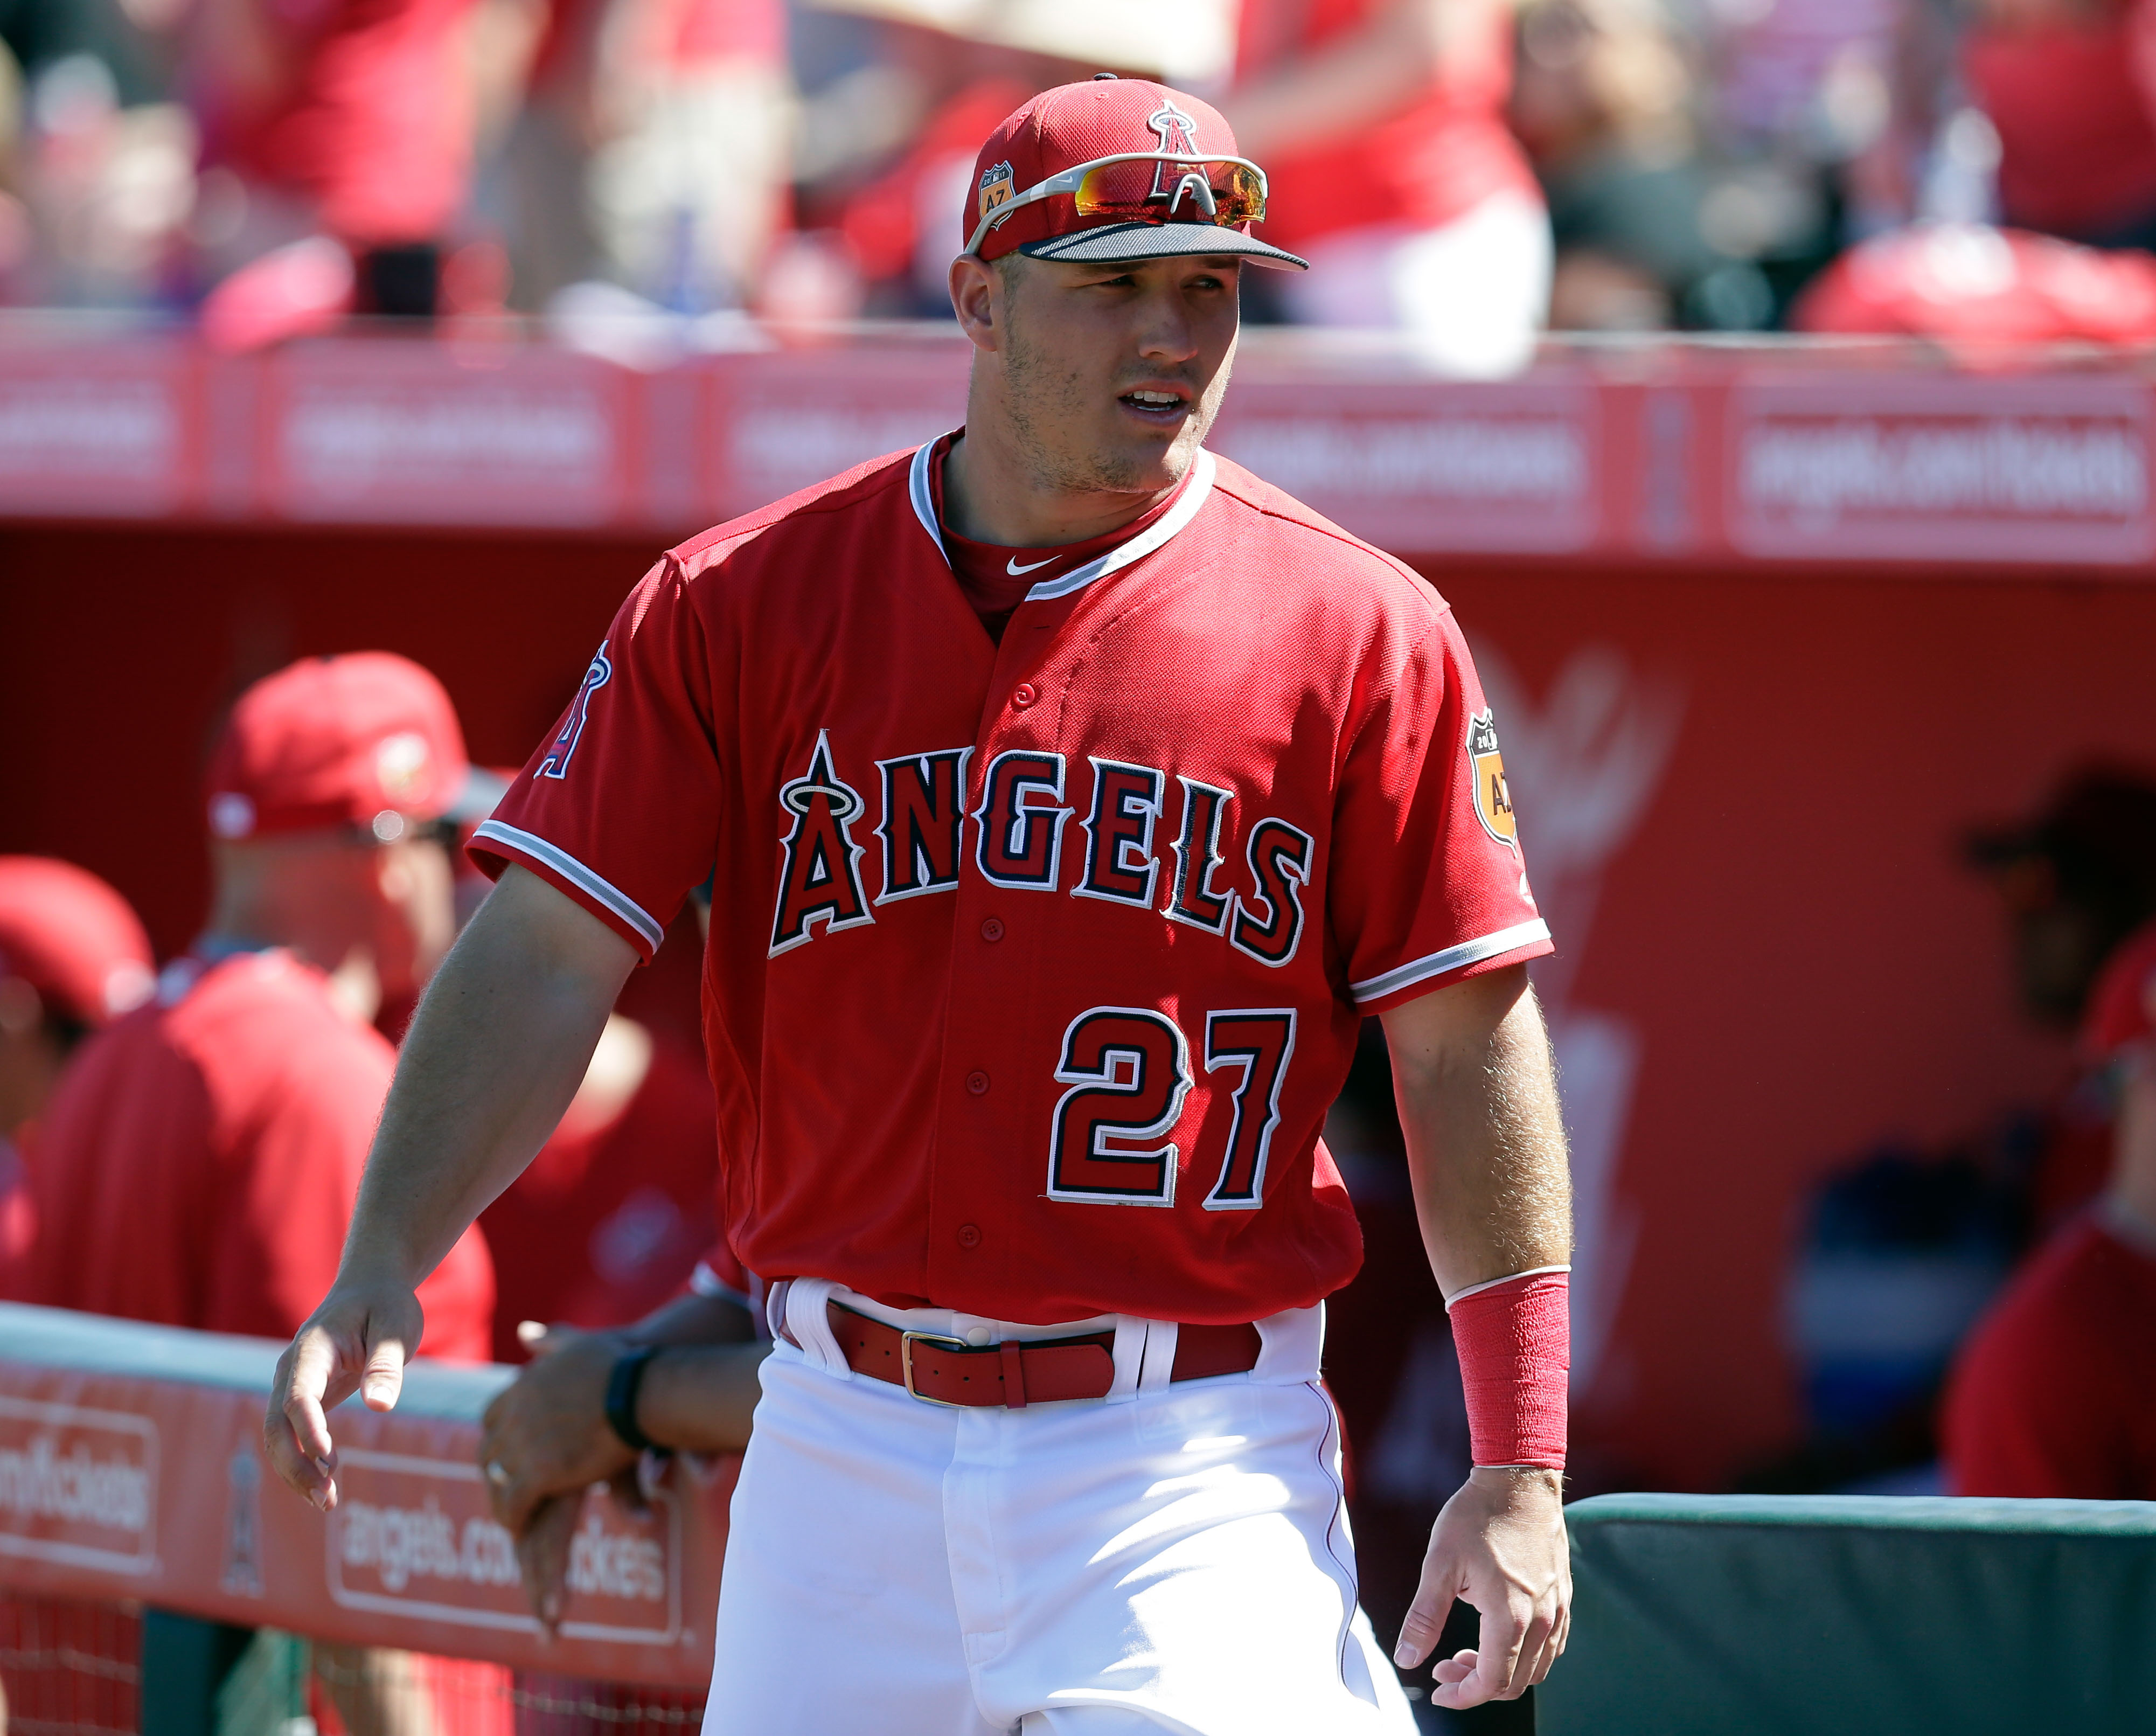 No. 27 — Mike Trout